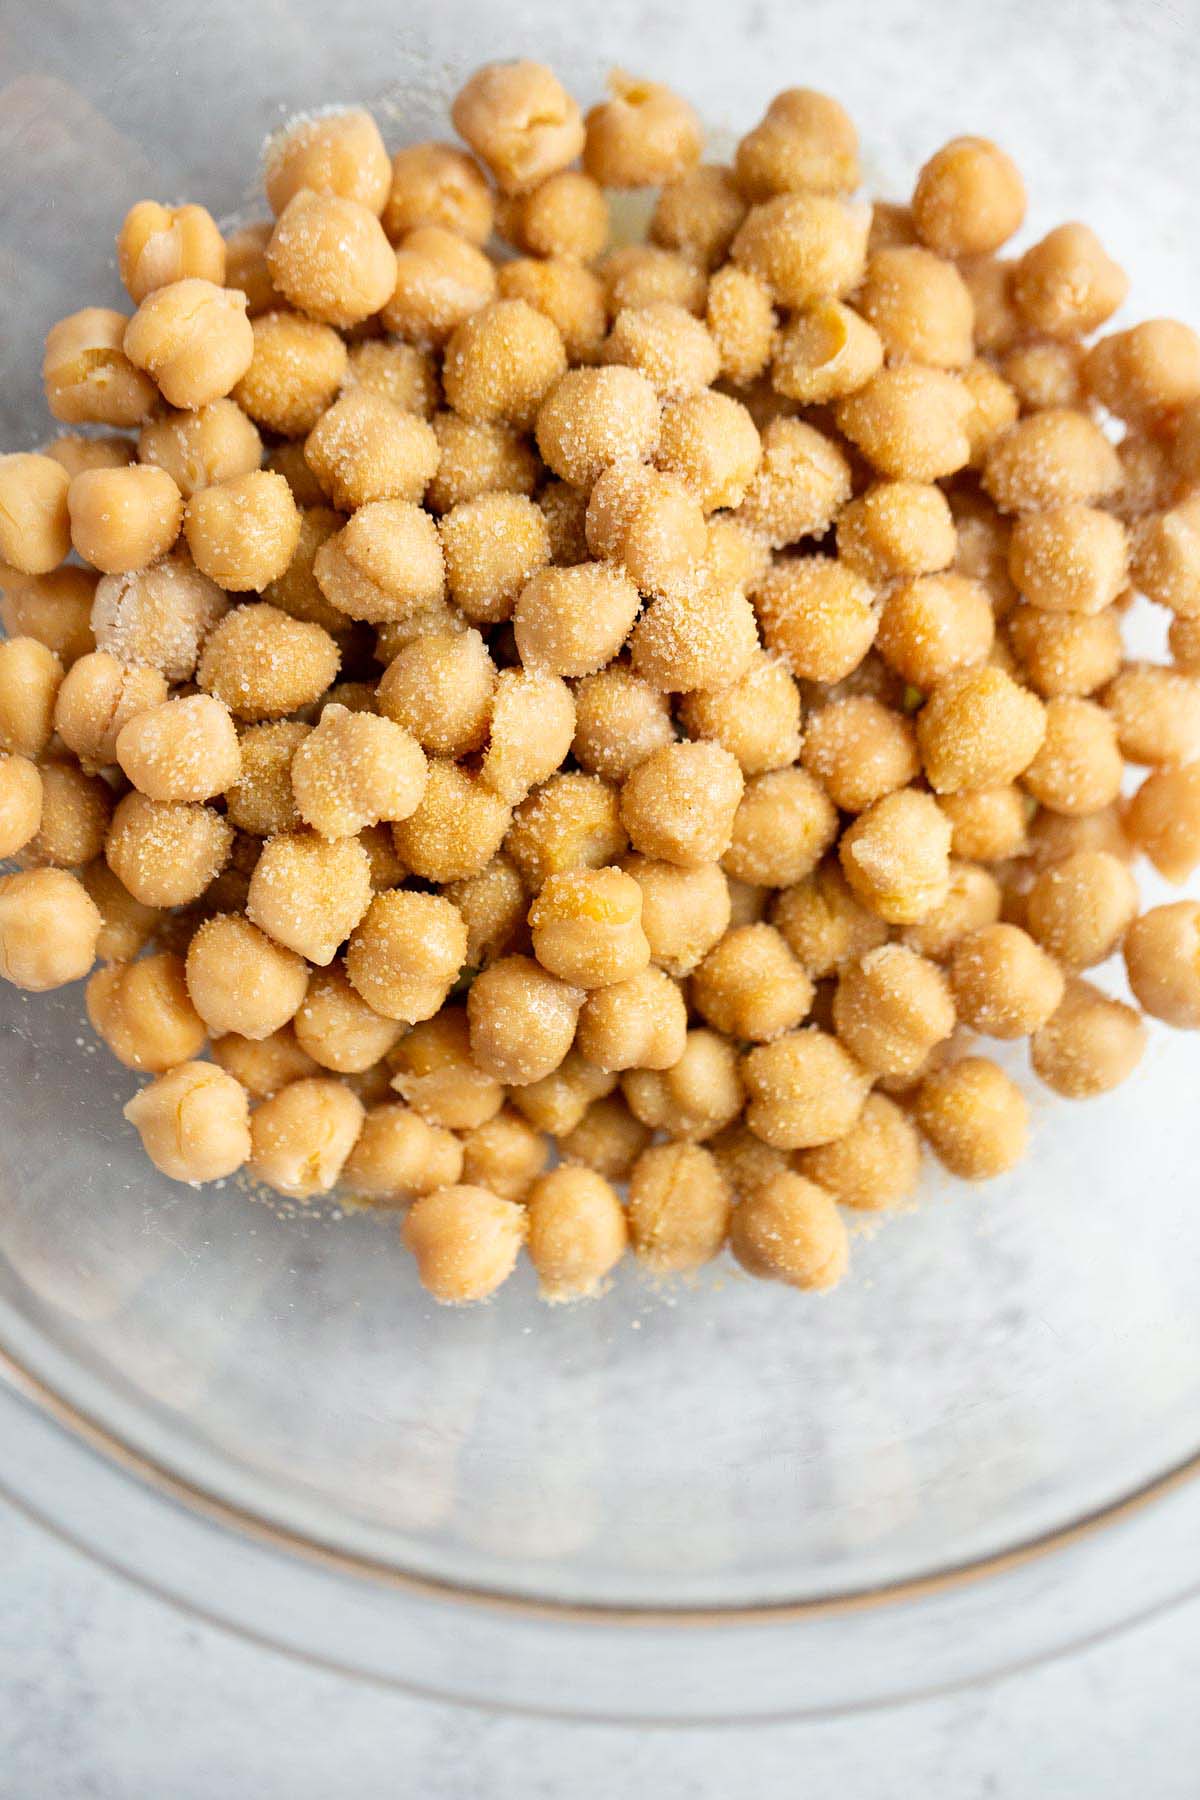 Chickpeas in a glass bowl with seasonings.